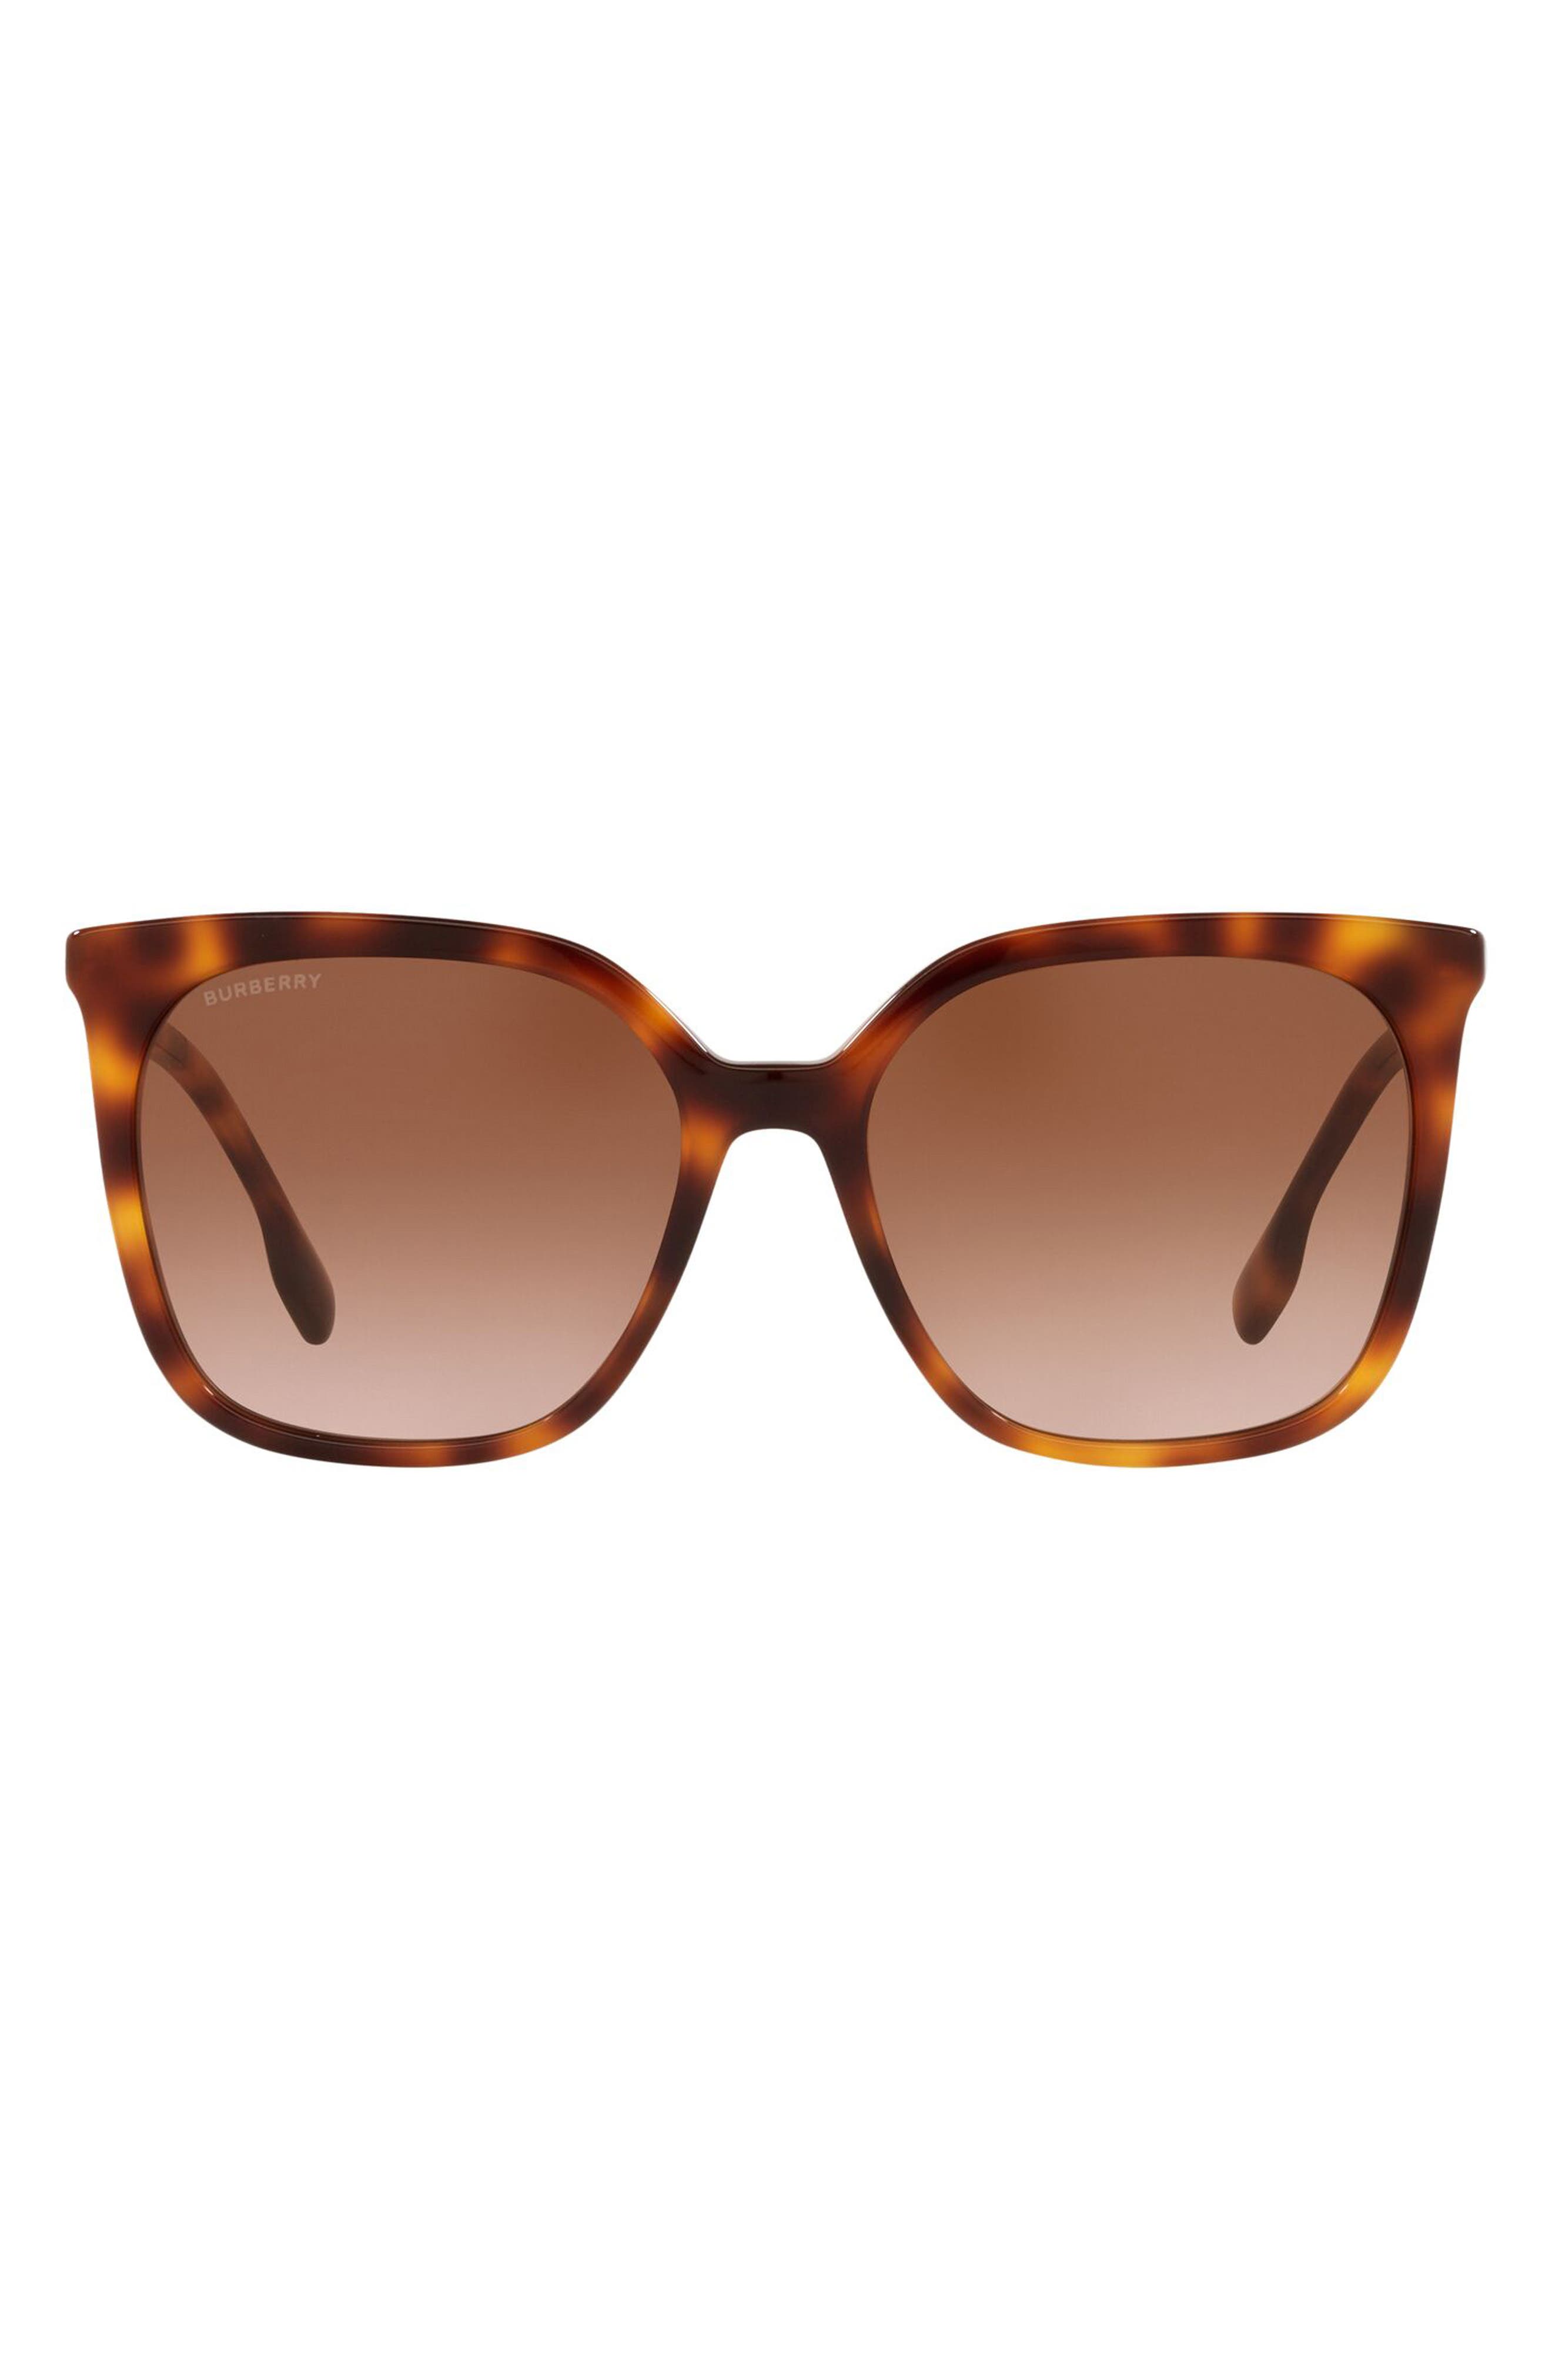 Burberry Lilac 56mm Square Sunglasses in Light Havana/Brown Gradient at Nordstrom